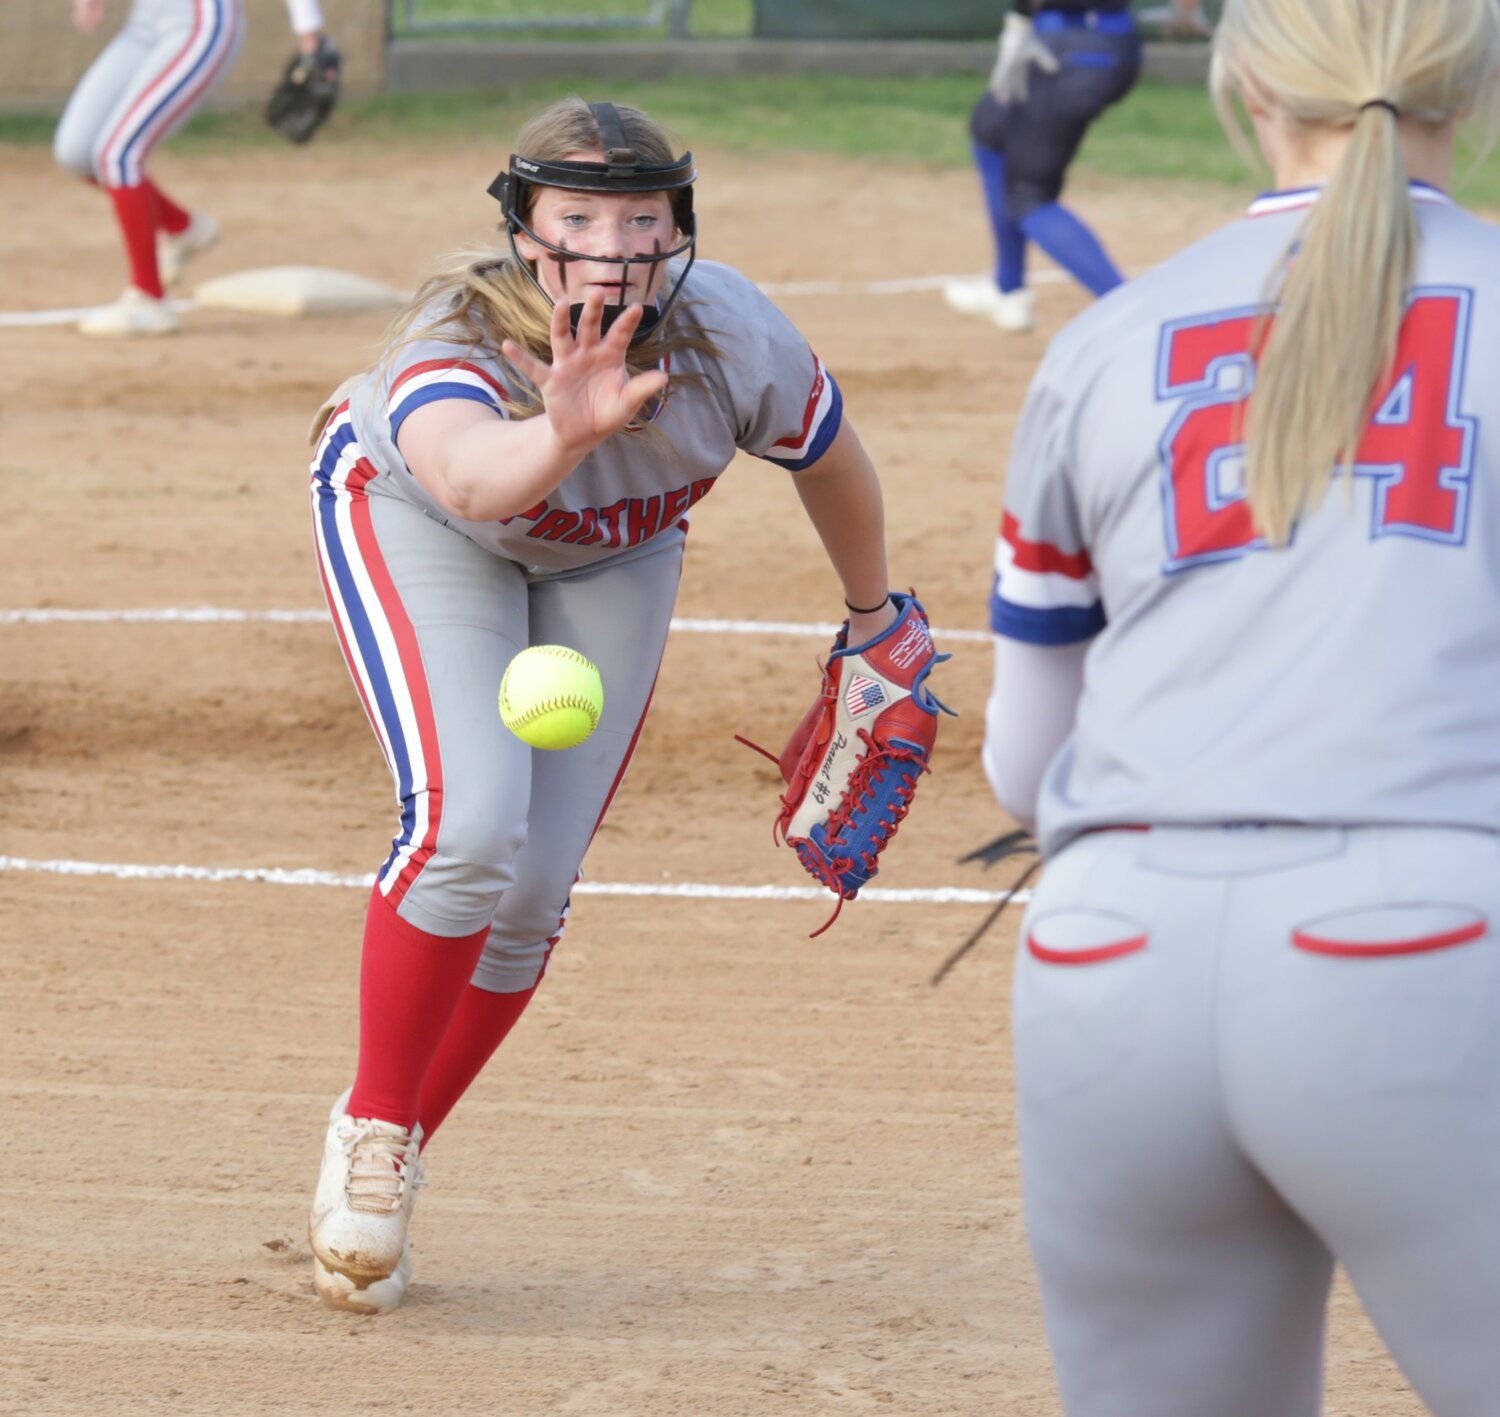 Alba-Golden’s Adielyn Smith comes off the mound and tosses to Alexis Wilmut at first after fielding a bunt in the win over Detroit.